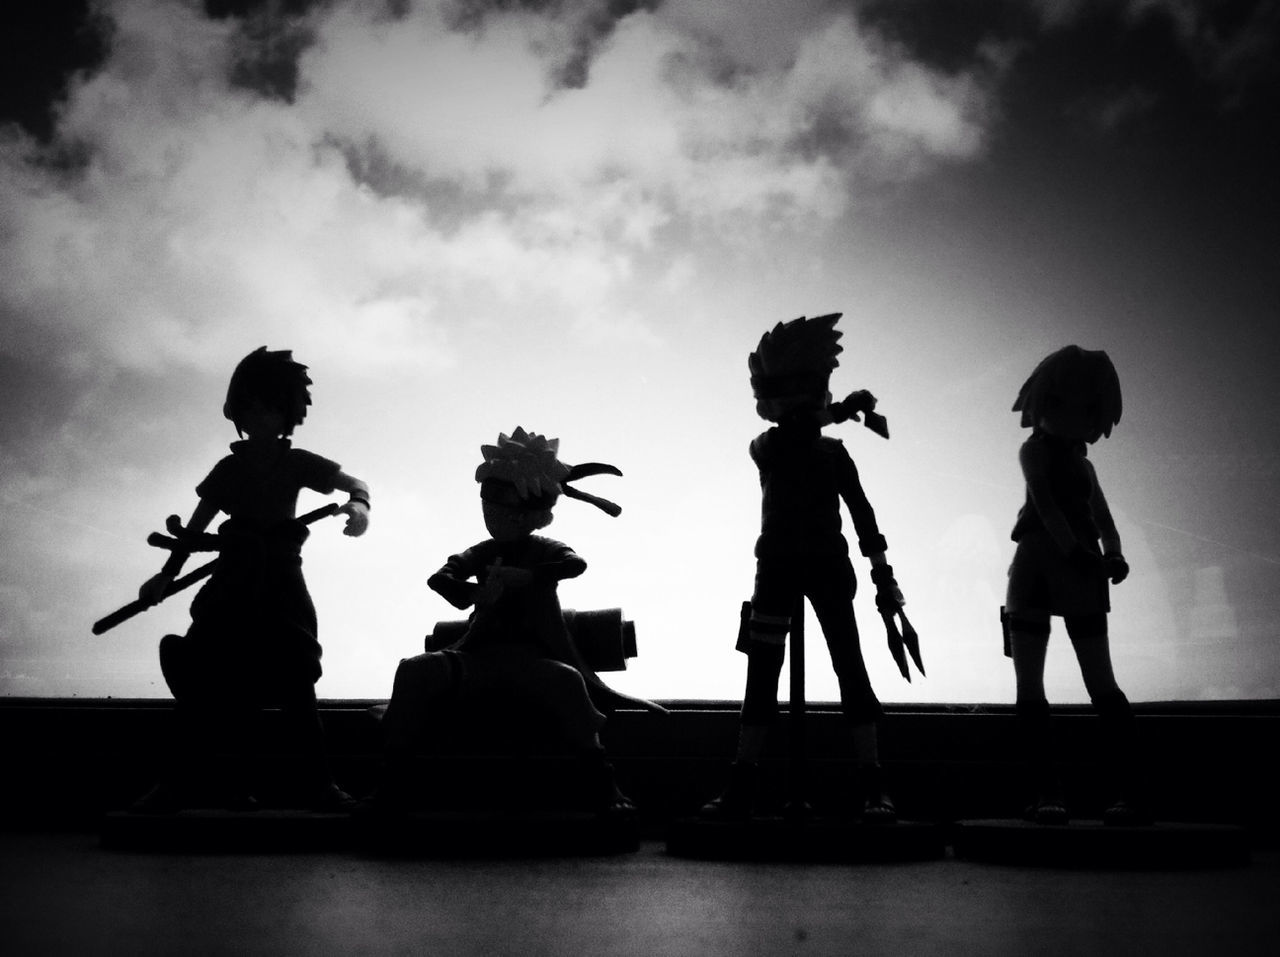 sky, lifestyles, togetherness, men, silhouette, leisure activity, full length, cloud - sky, bonding, low angle view, standing, boys, childhood, love, human representation, friendship